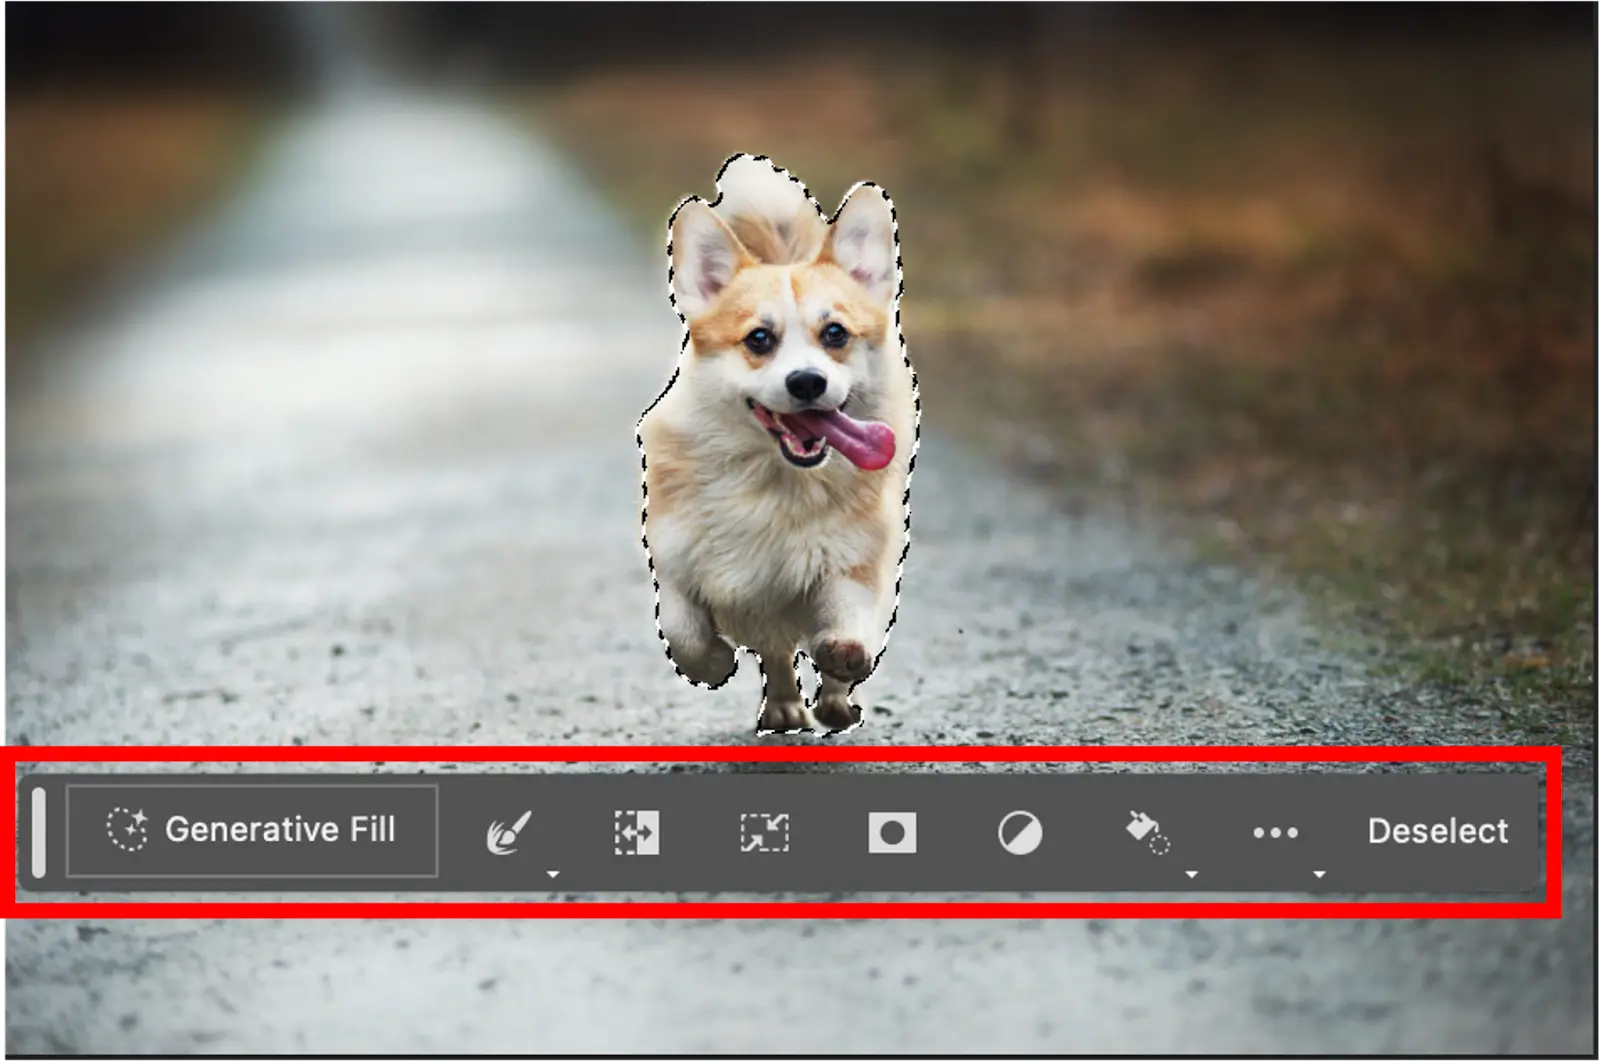 Adobe Firefly Beta features  Image Credit : Adobe